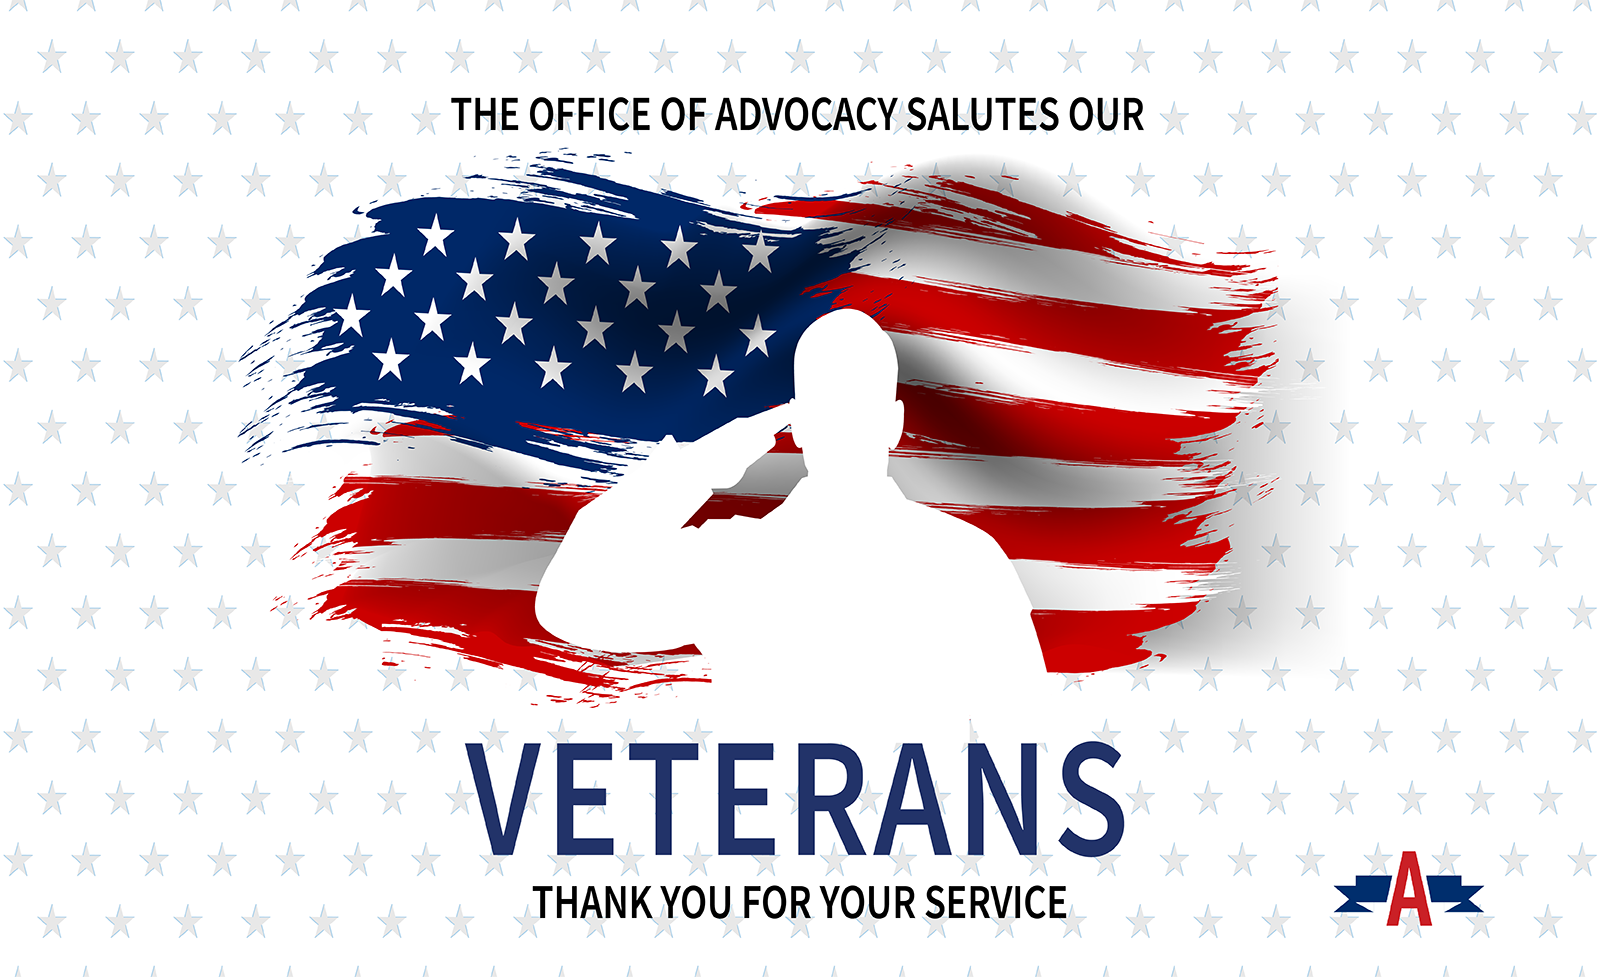 The Office of Advocacy salutes our Veterans. Thank you for your service.